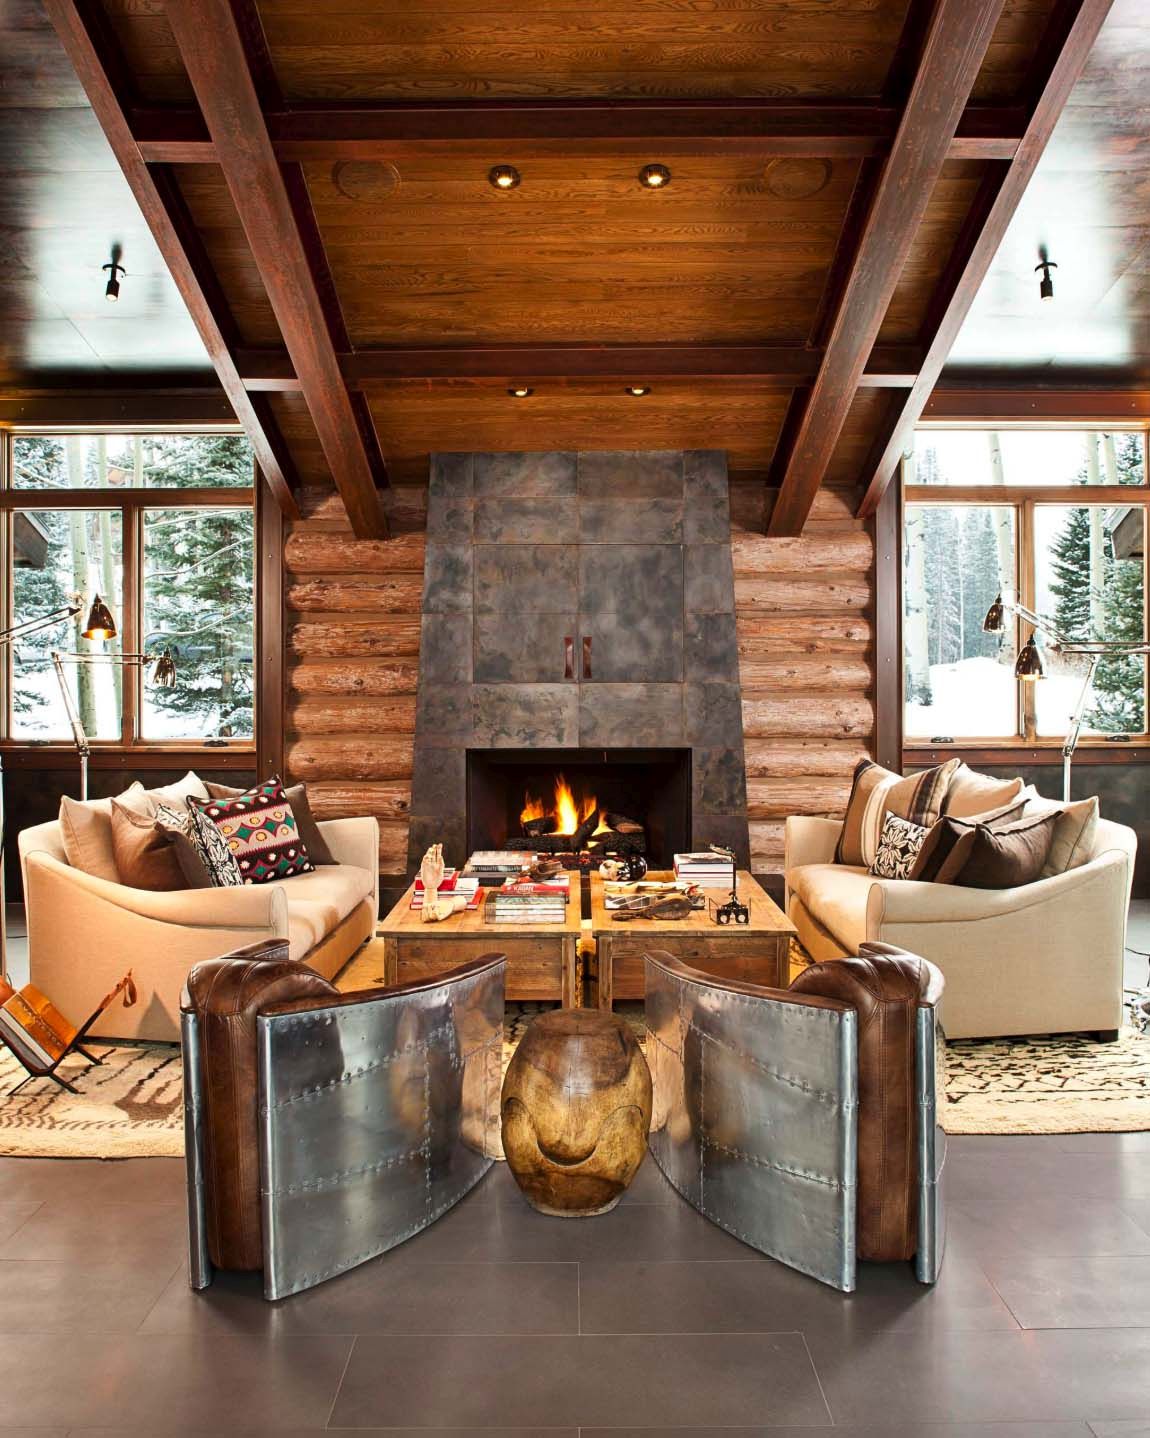 Rustic Living Room Decor Ideas Inspired By Cozy Mountain Cabins - Decorpion